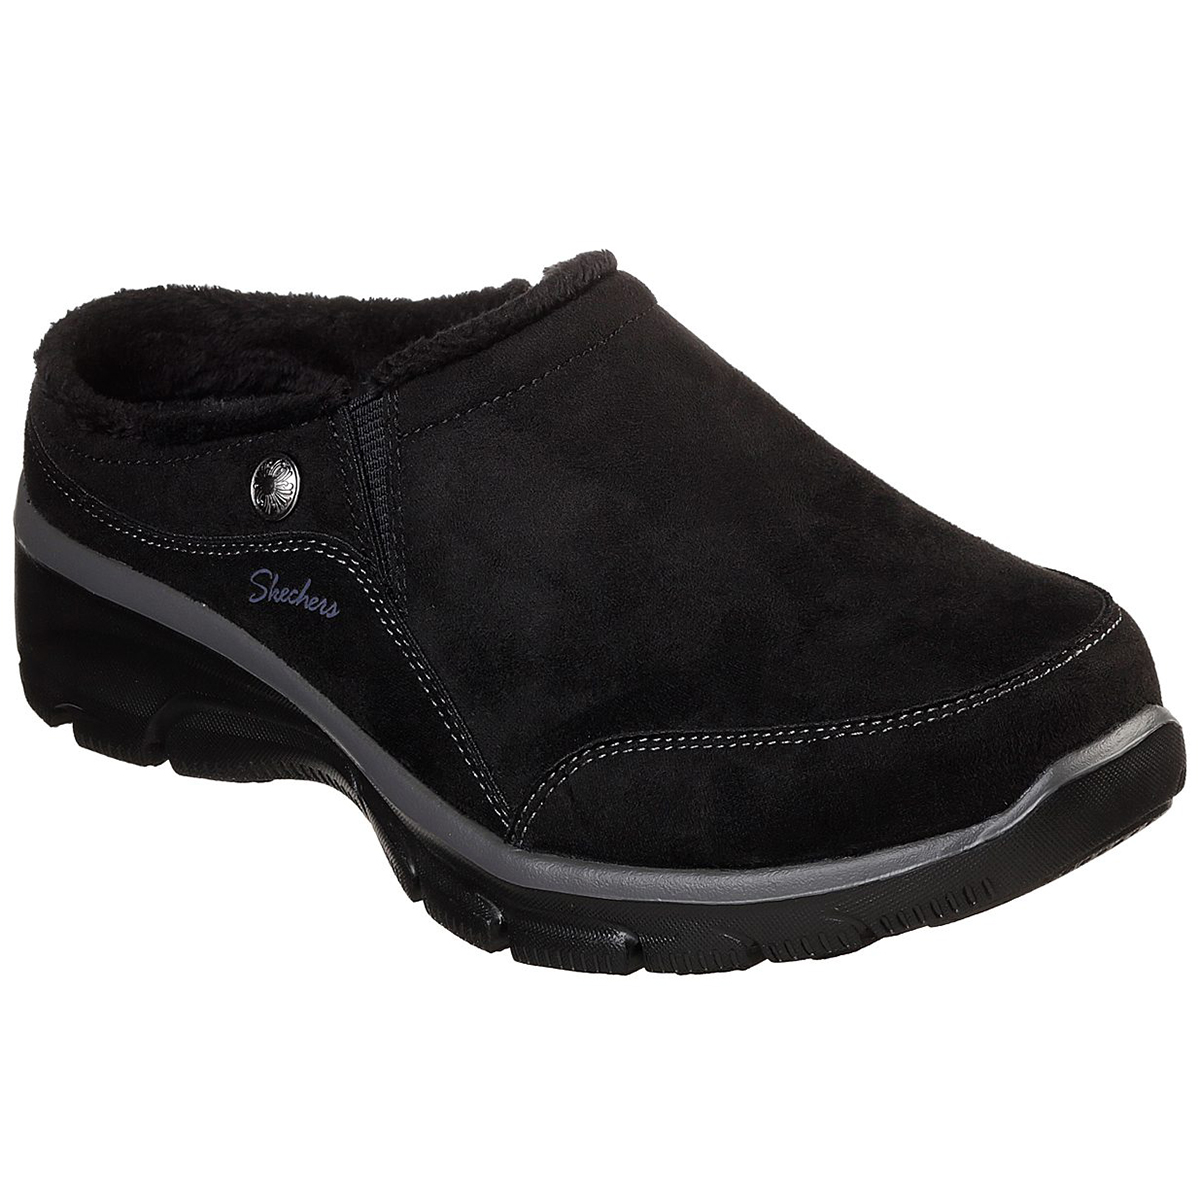 Skechers Women's Relaxed Fit Easy Going Shoes - Black, 9